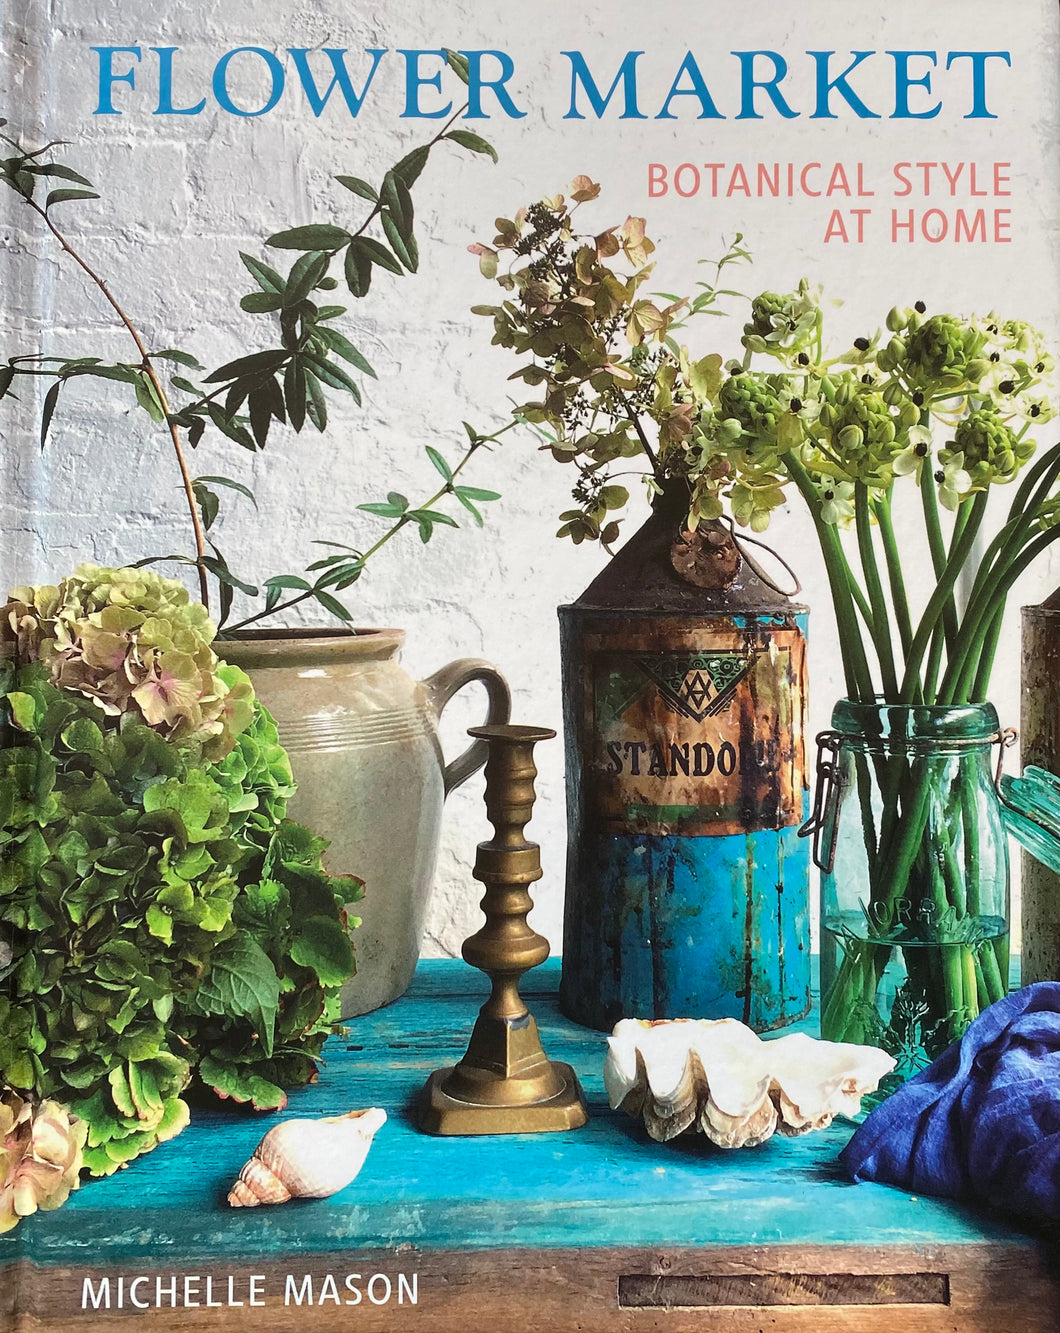 Flower Market - Botanical Style at Home by Michelle Mason